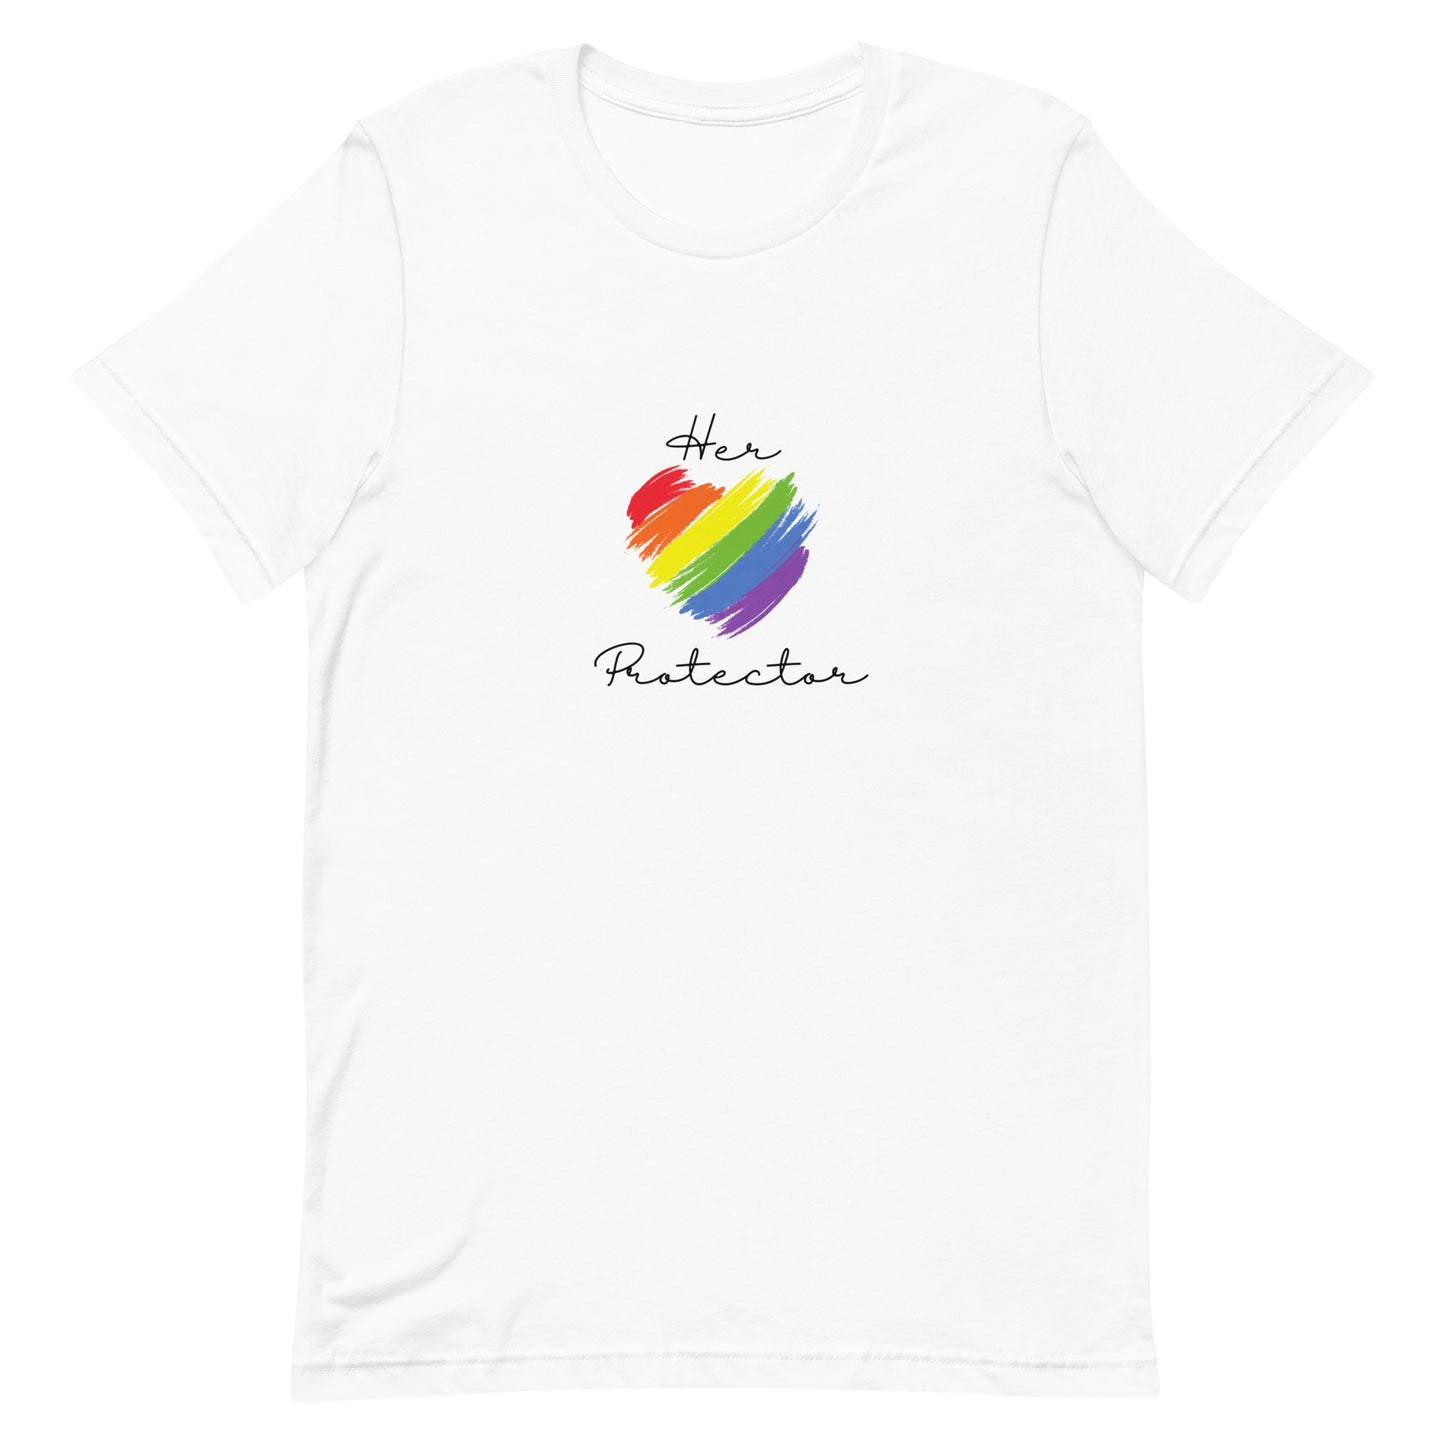 Her Protector (Pride) - Unisex t-shirt